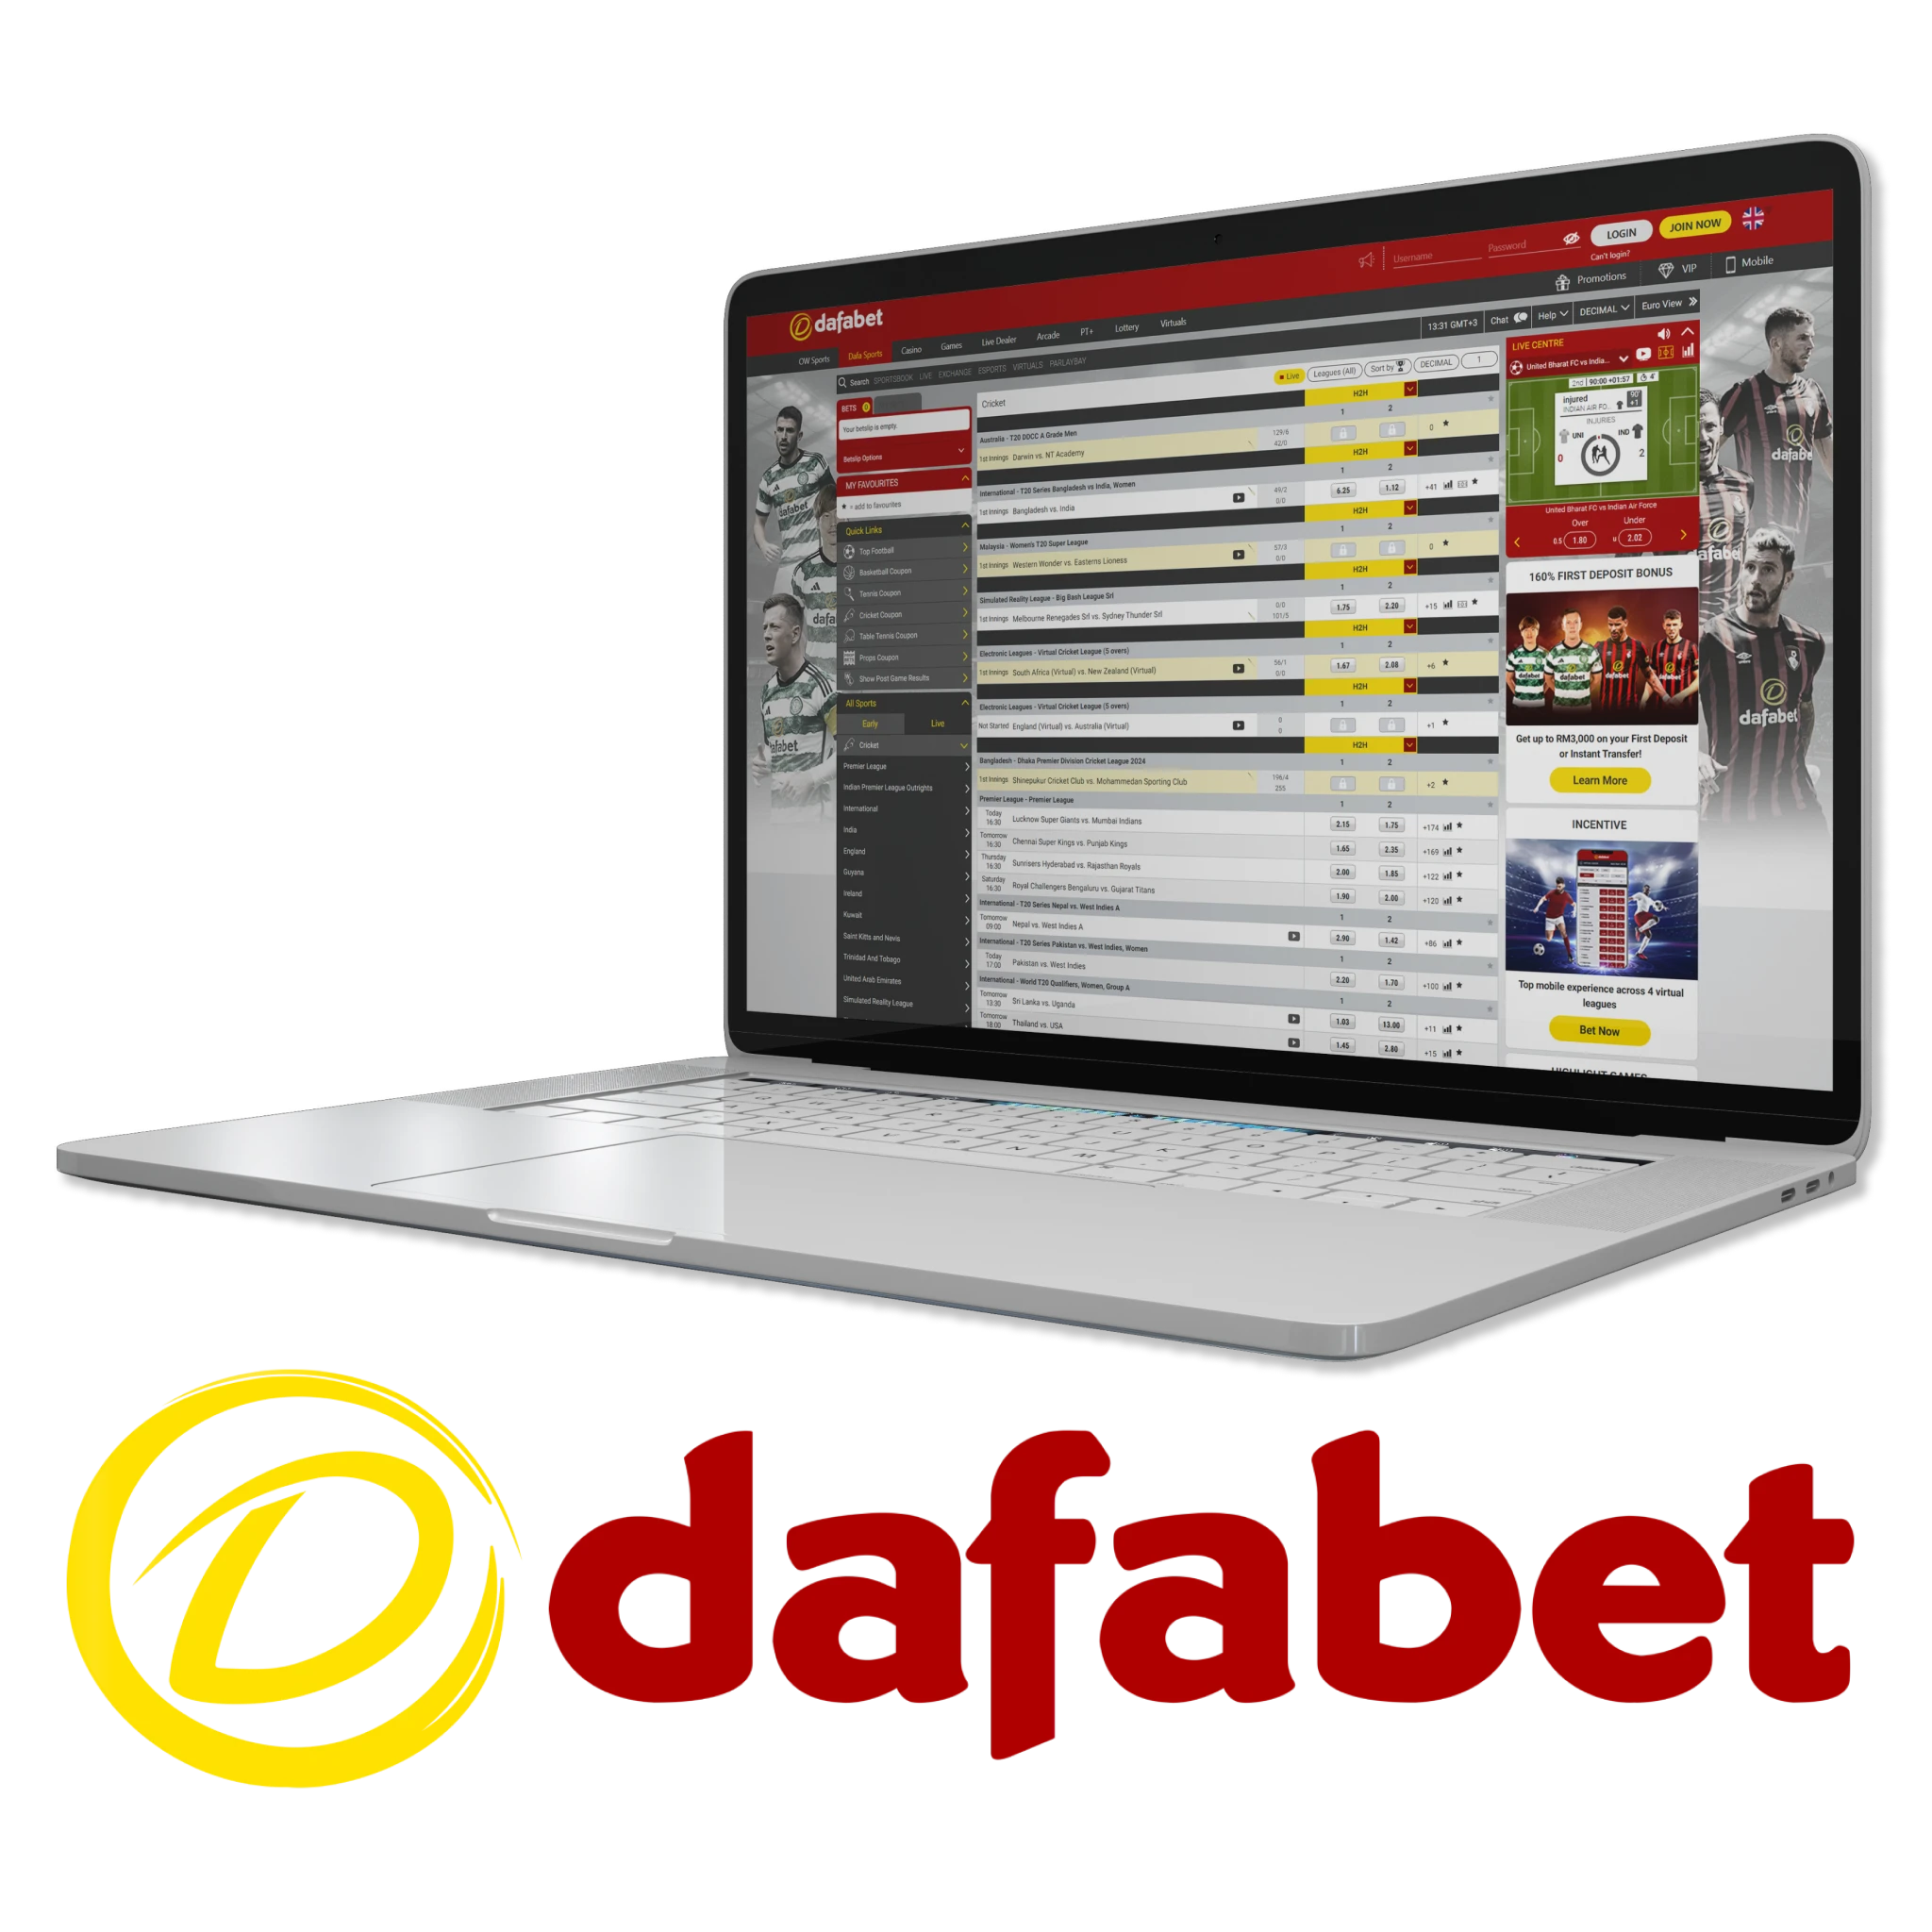 Dafabet is a gambling platform where cricket betting can be done to your advantage using different features, markets, and bet types daily.